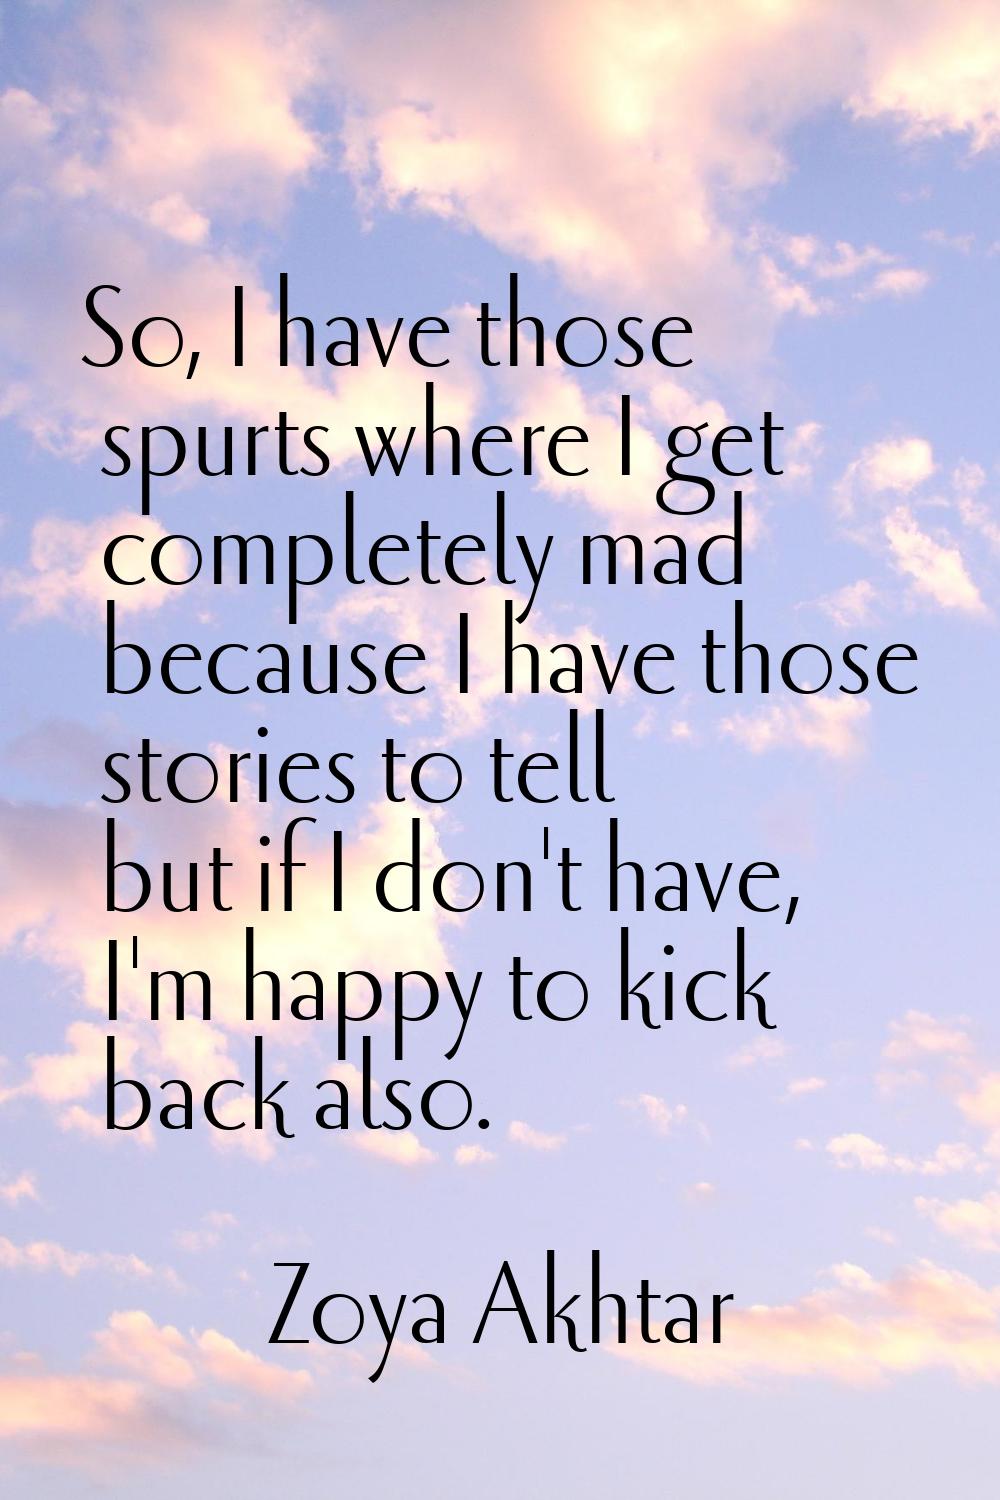 So, I have those spurts where I get completely mad because I have those stories to tell but if I do